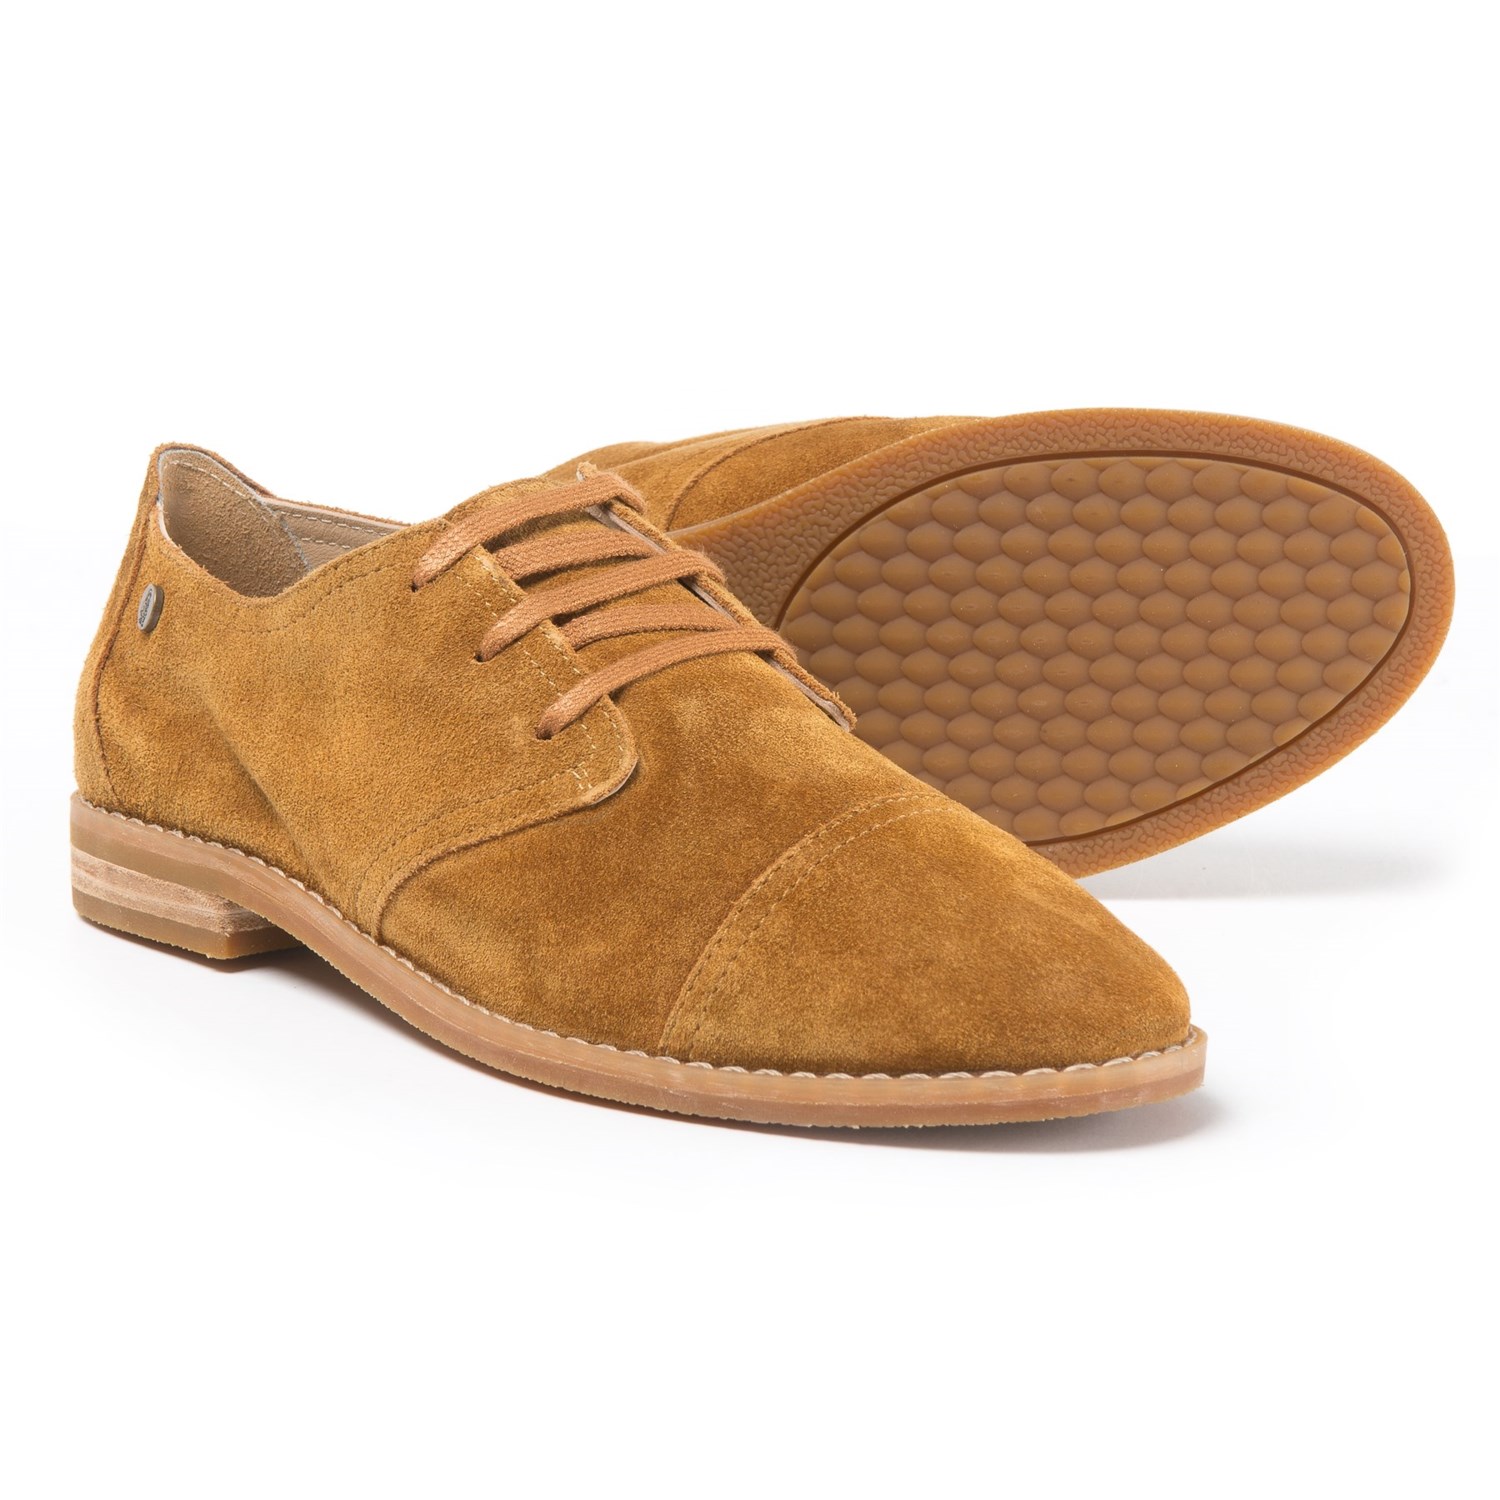 Hush Puppies Aiden Clever Oxford Shoes – Suede (For Women)